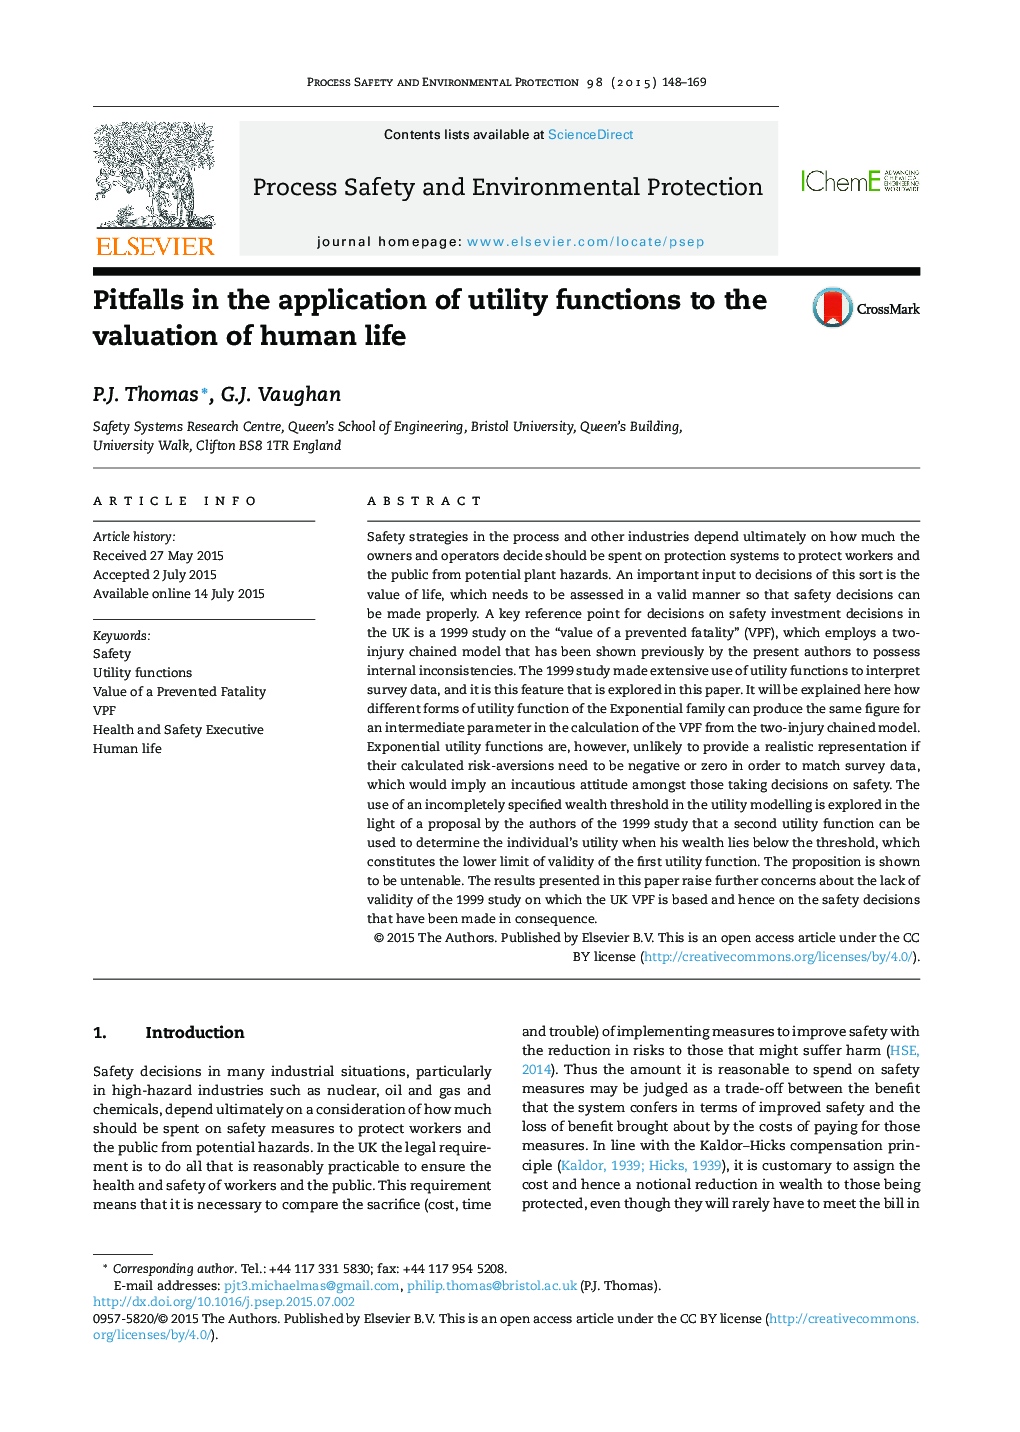 Pitfalls in the application of utility functions to the valuation of human life